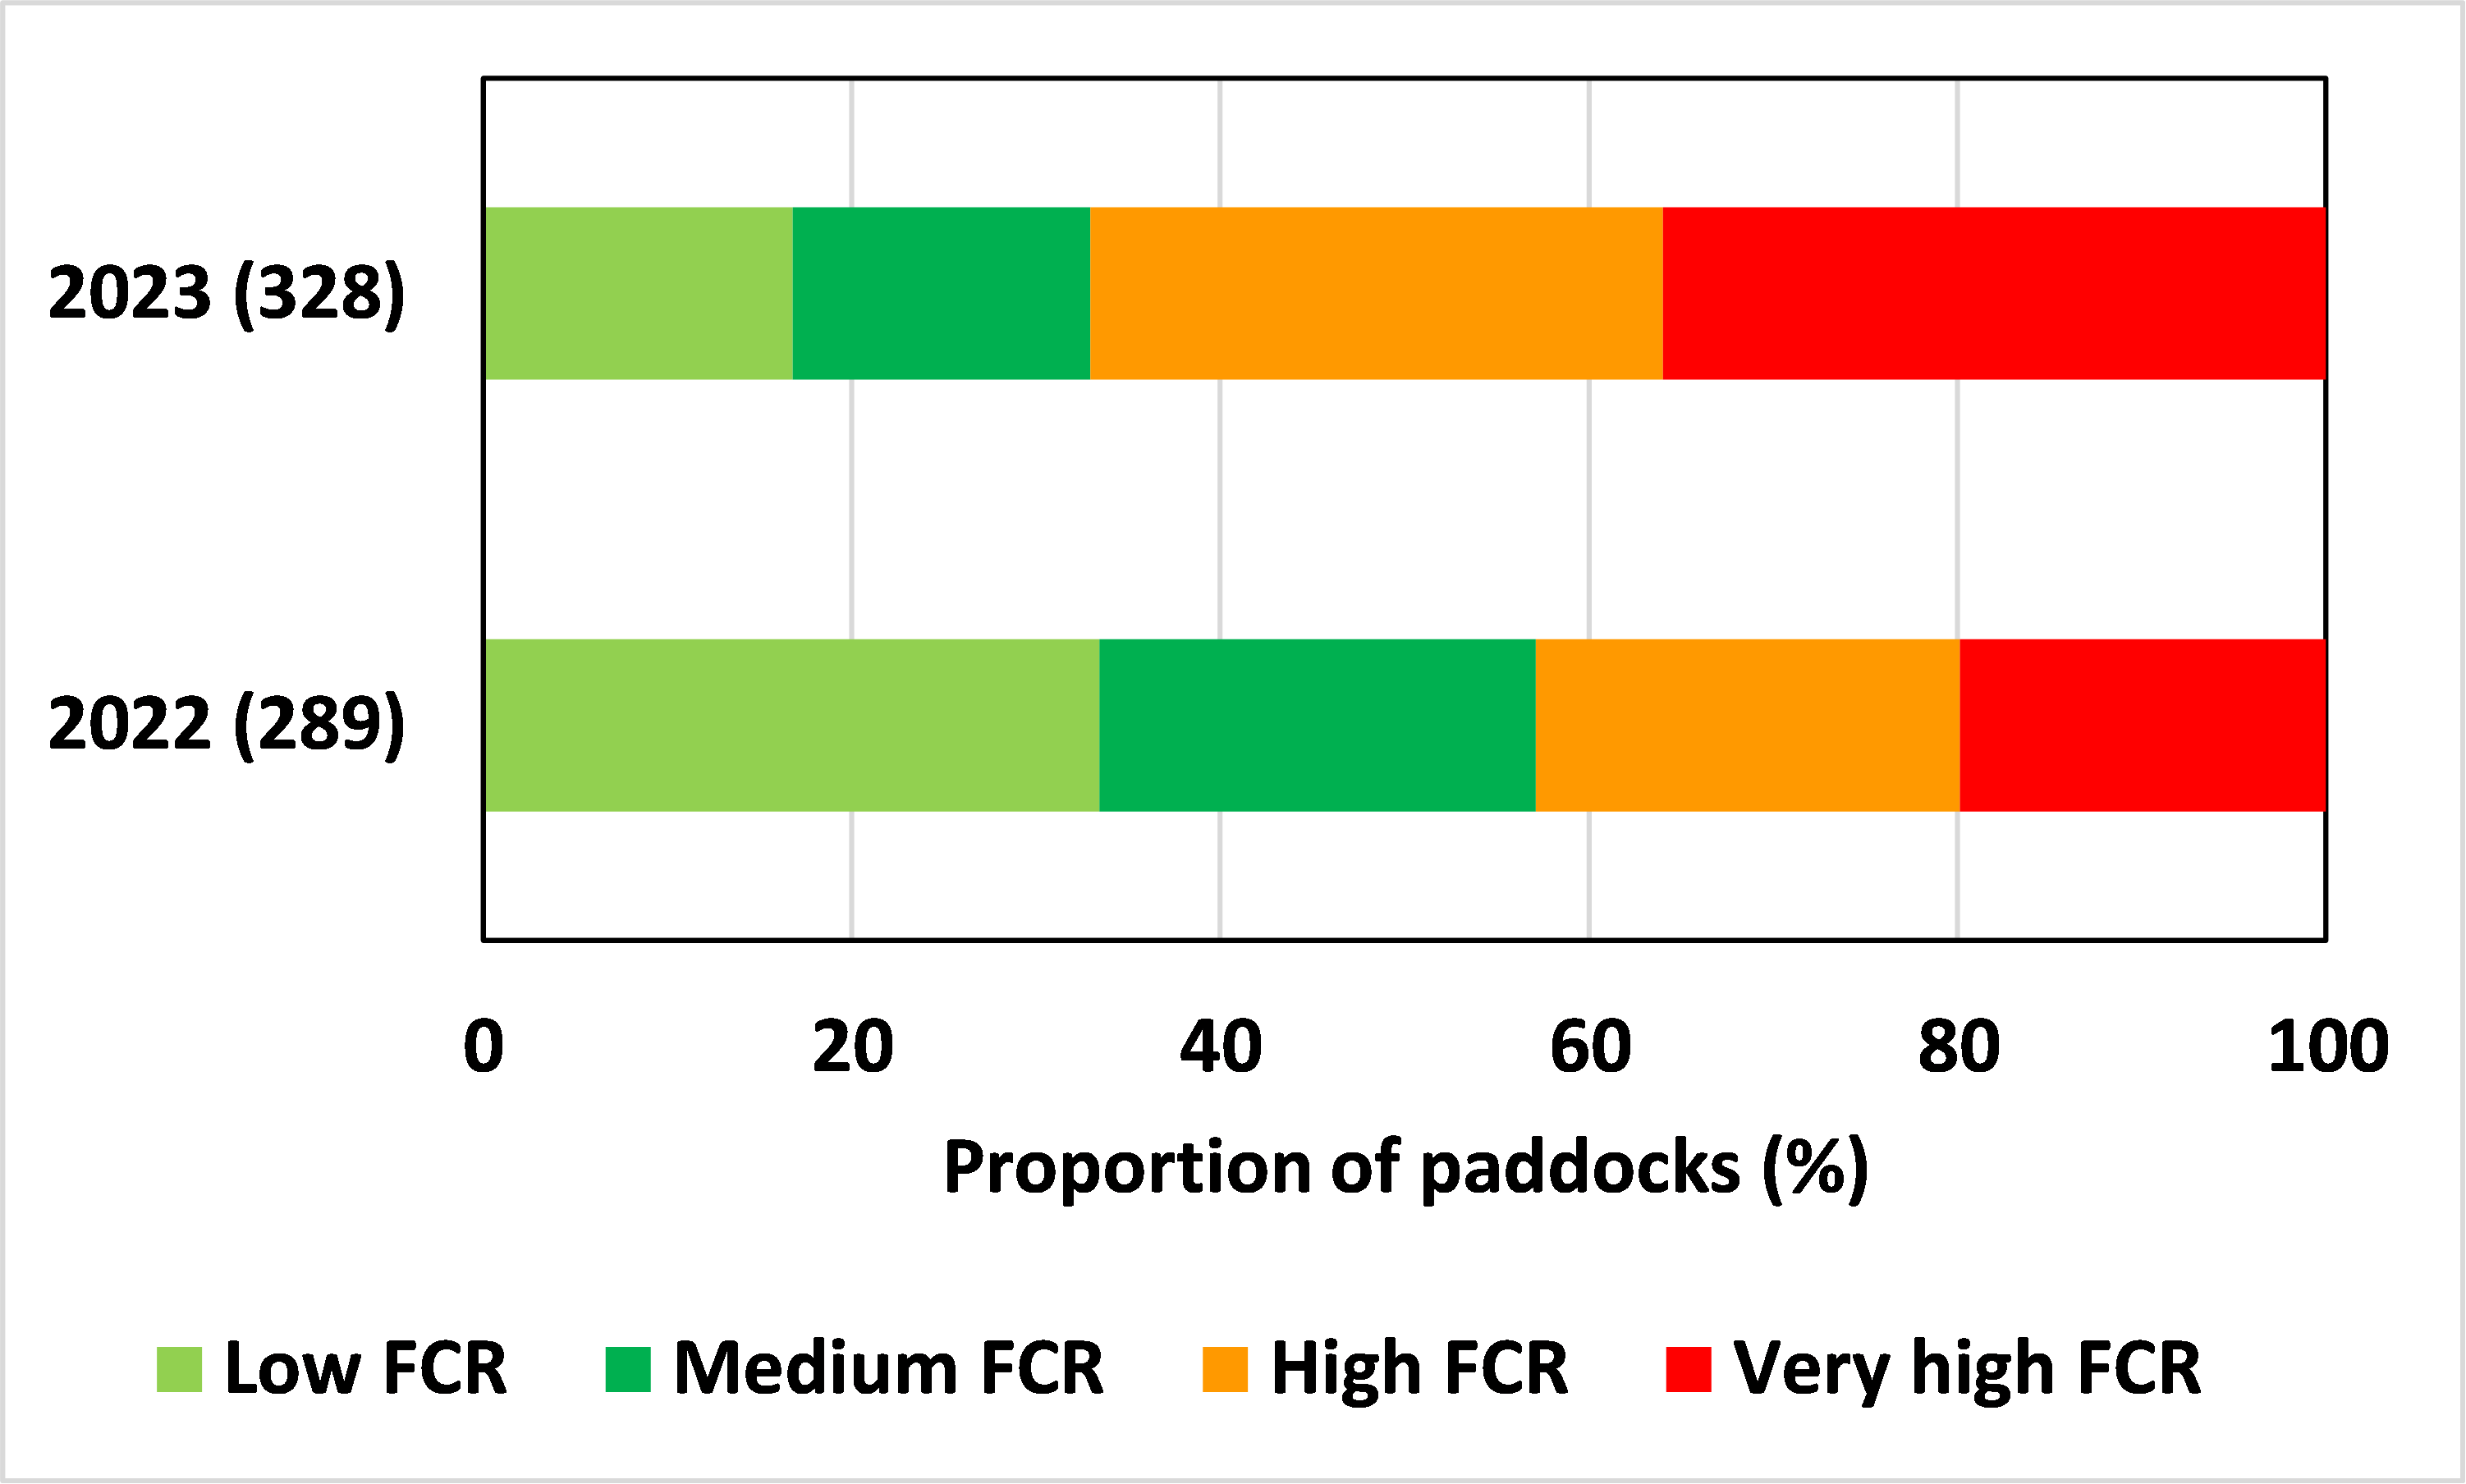 Bar graph shoes proportion of winter cereal paddocks with varying levels of Fusarium crown rot (FCR) infection in 2022 and 2023. Number in brackets (Y-axis) is the number of paddocks sampled in each year.  Low = ≤10% FCR, medium = 11–25% FCR, high = 26–50% FCR, very high = ≥51% FCR